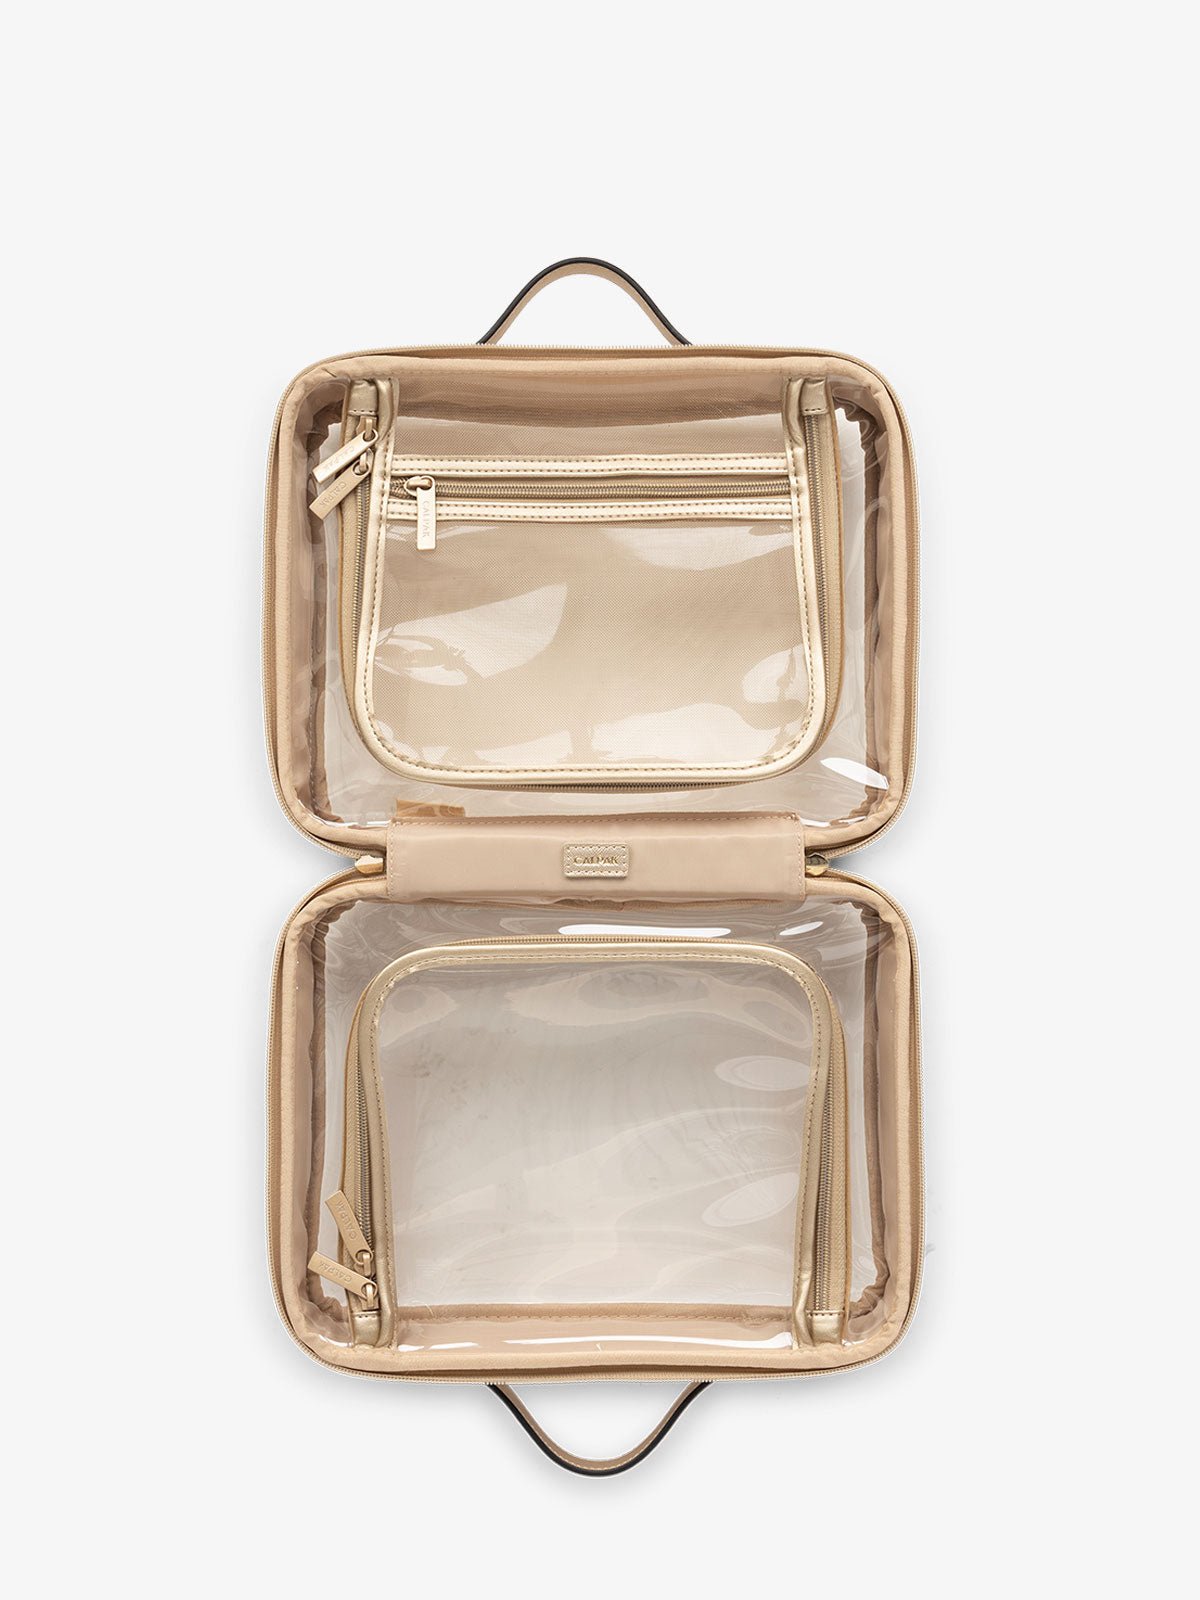 CALPAK clear travel makeup bag with zipper enclosed compartments in shiny gold